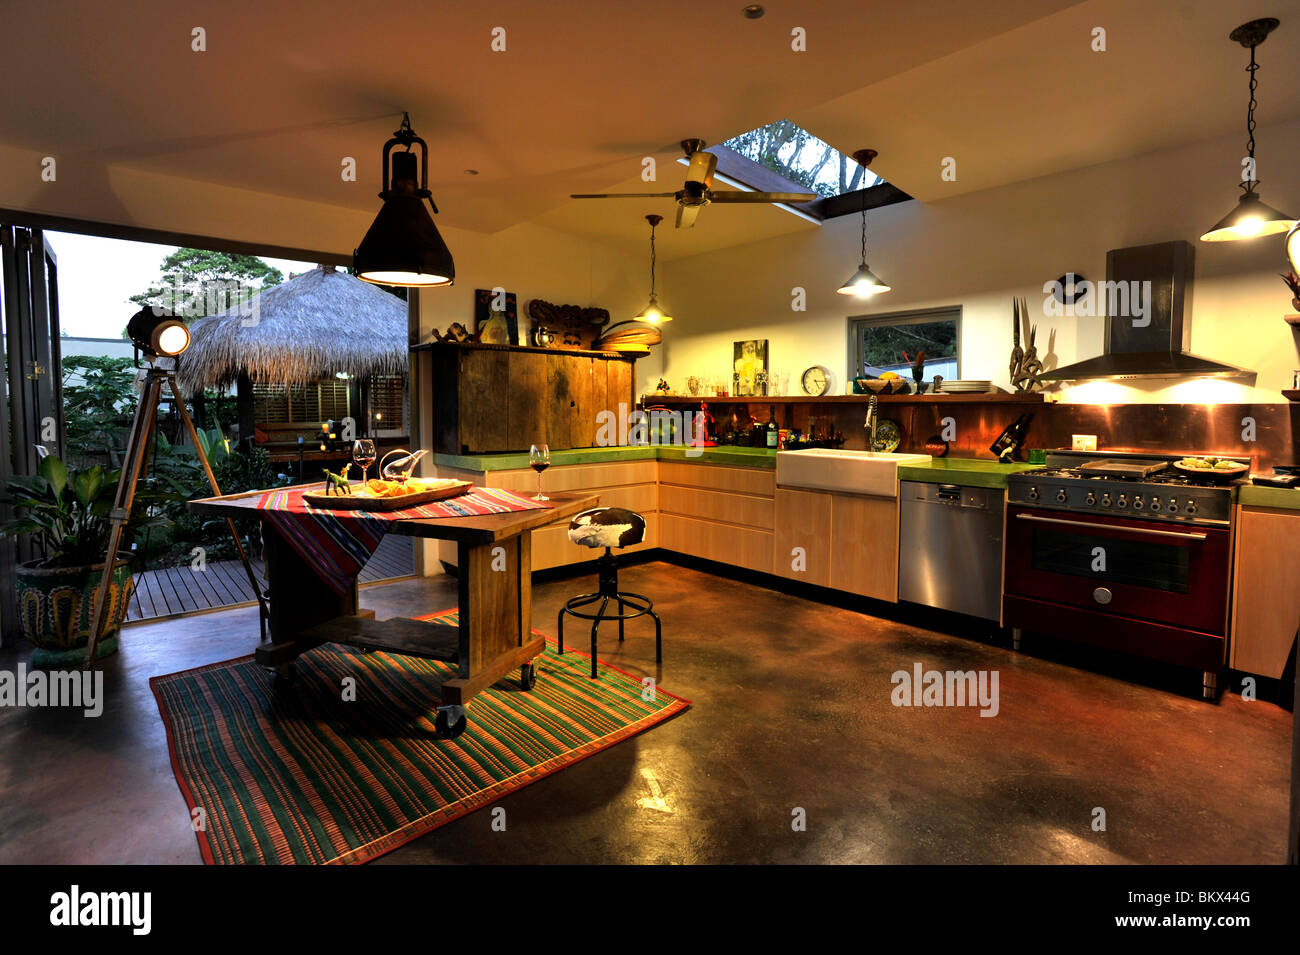 A kitchen in a modern sub-tropical home Stock Photo